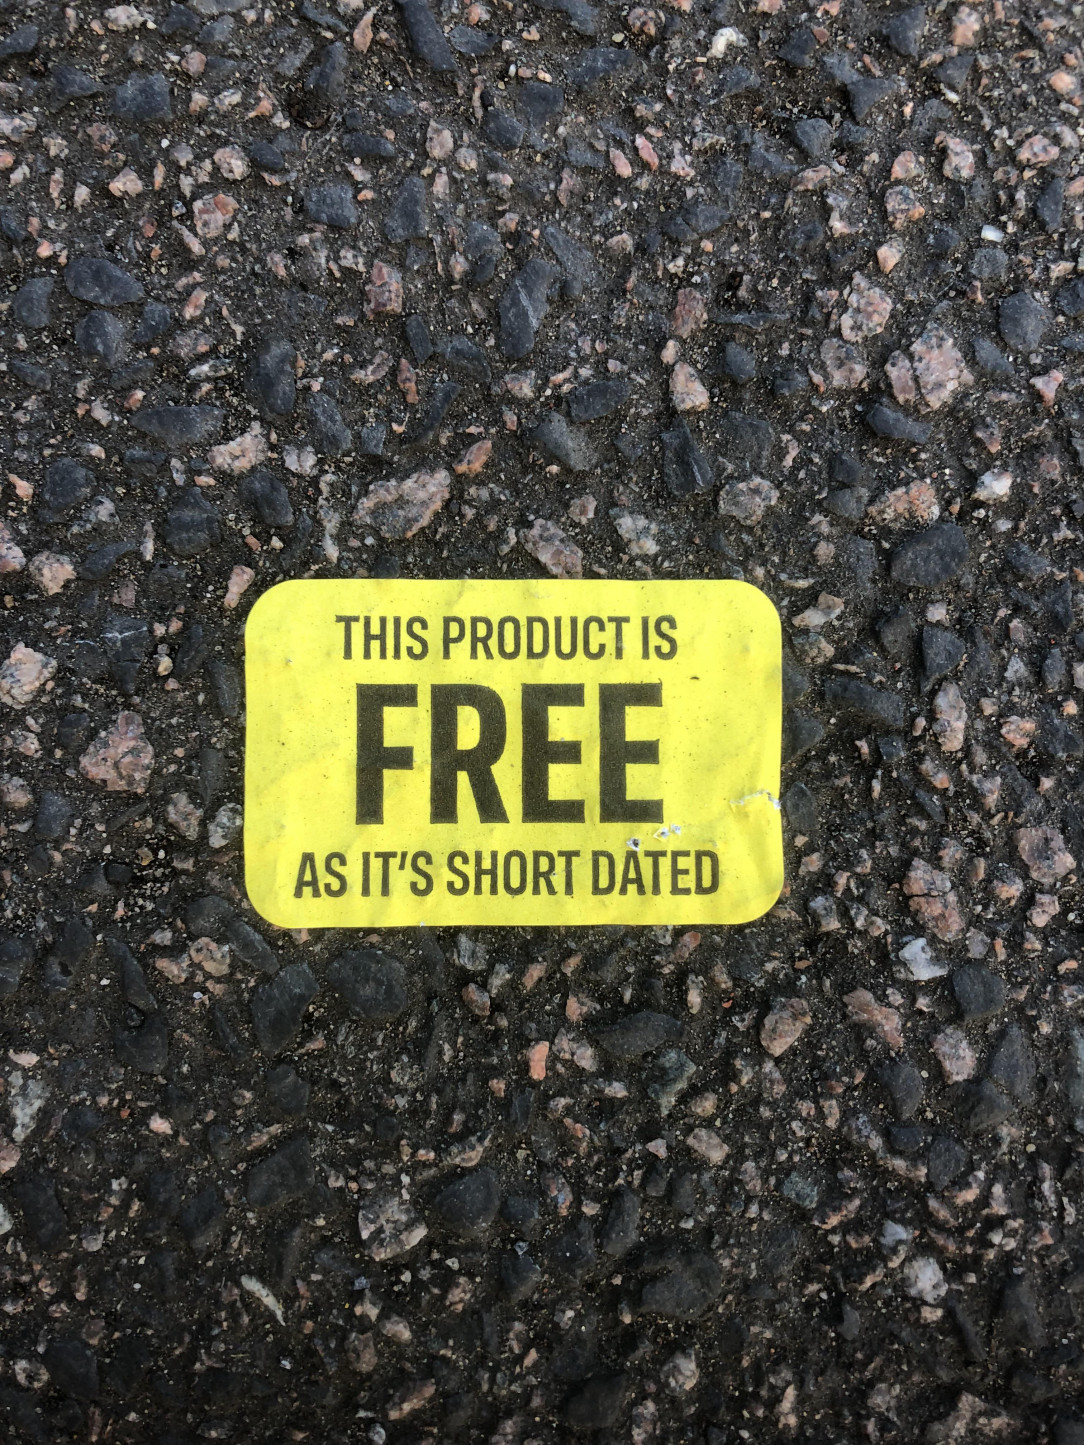 Stuck to the pavement about 250 m from a small supermarket (UK)